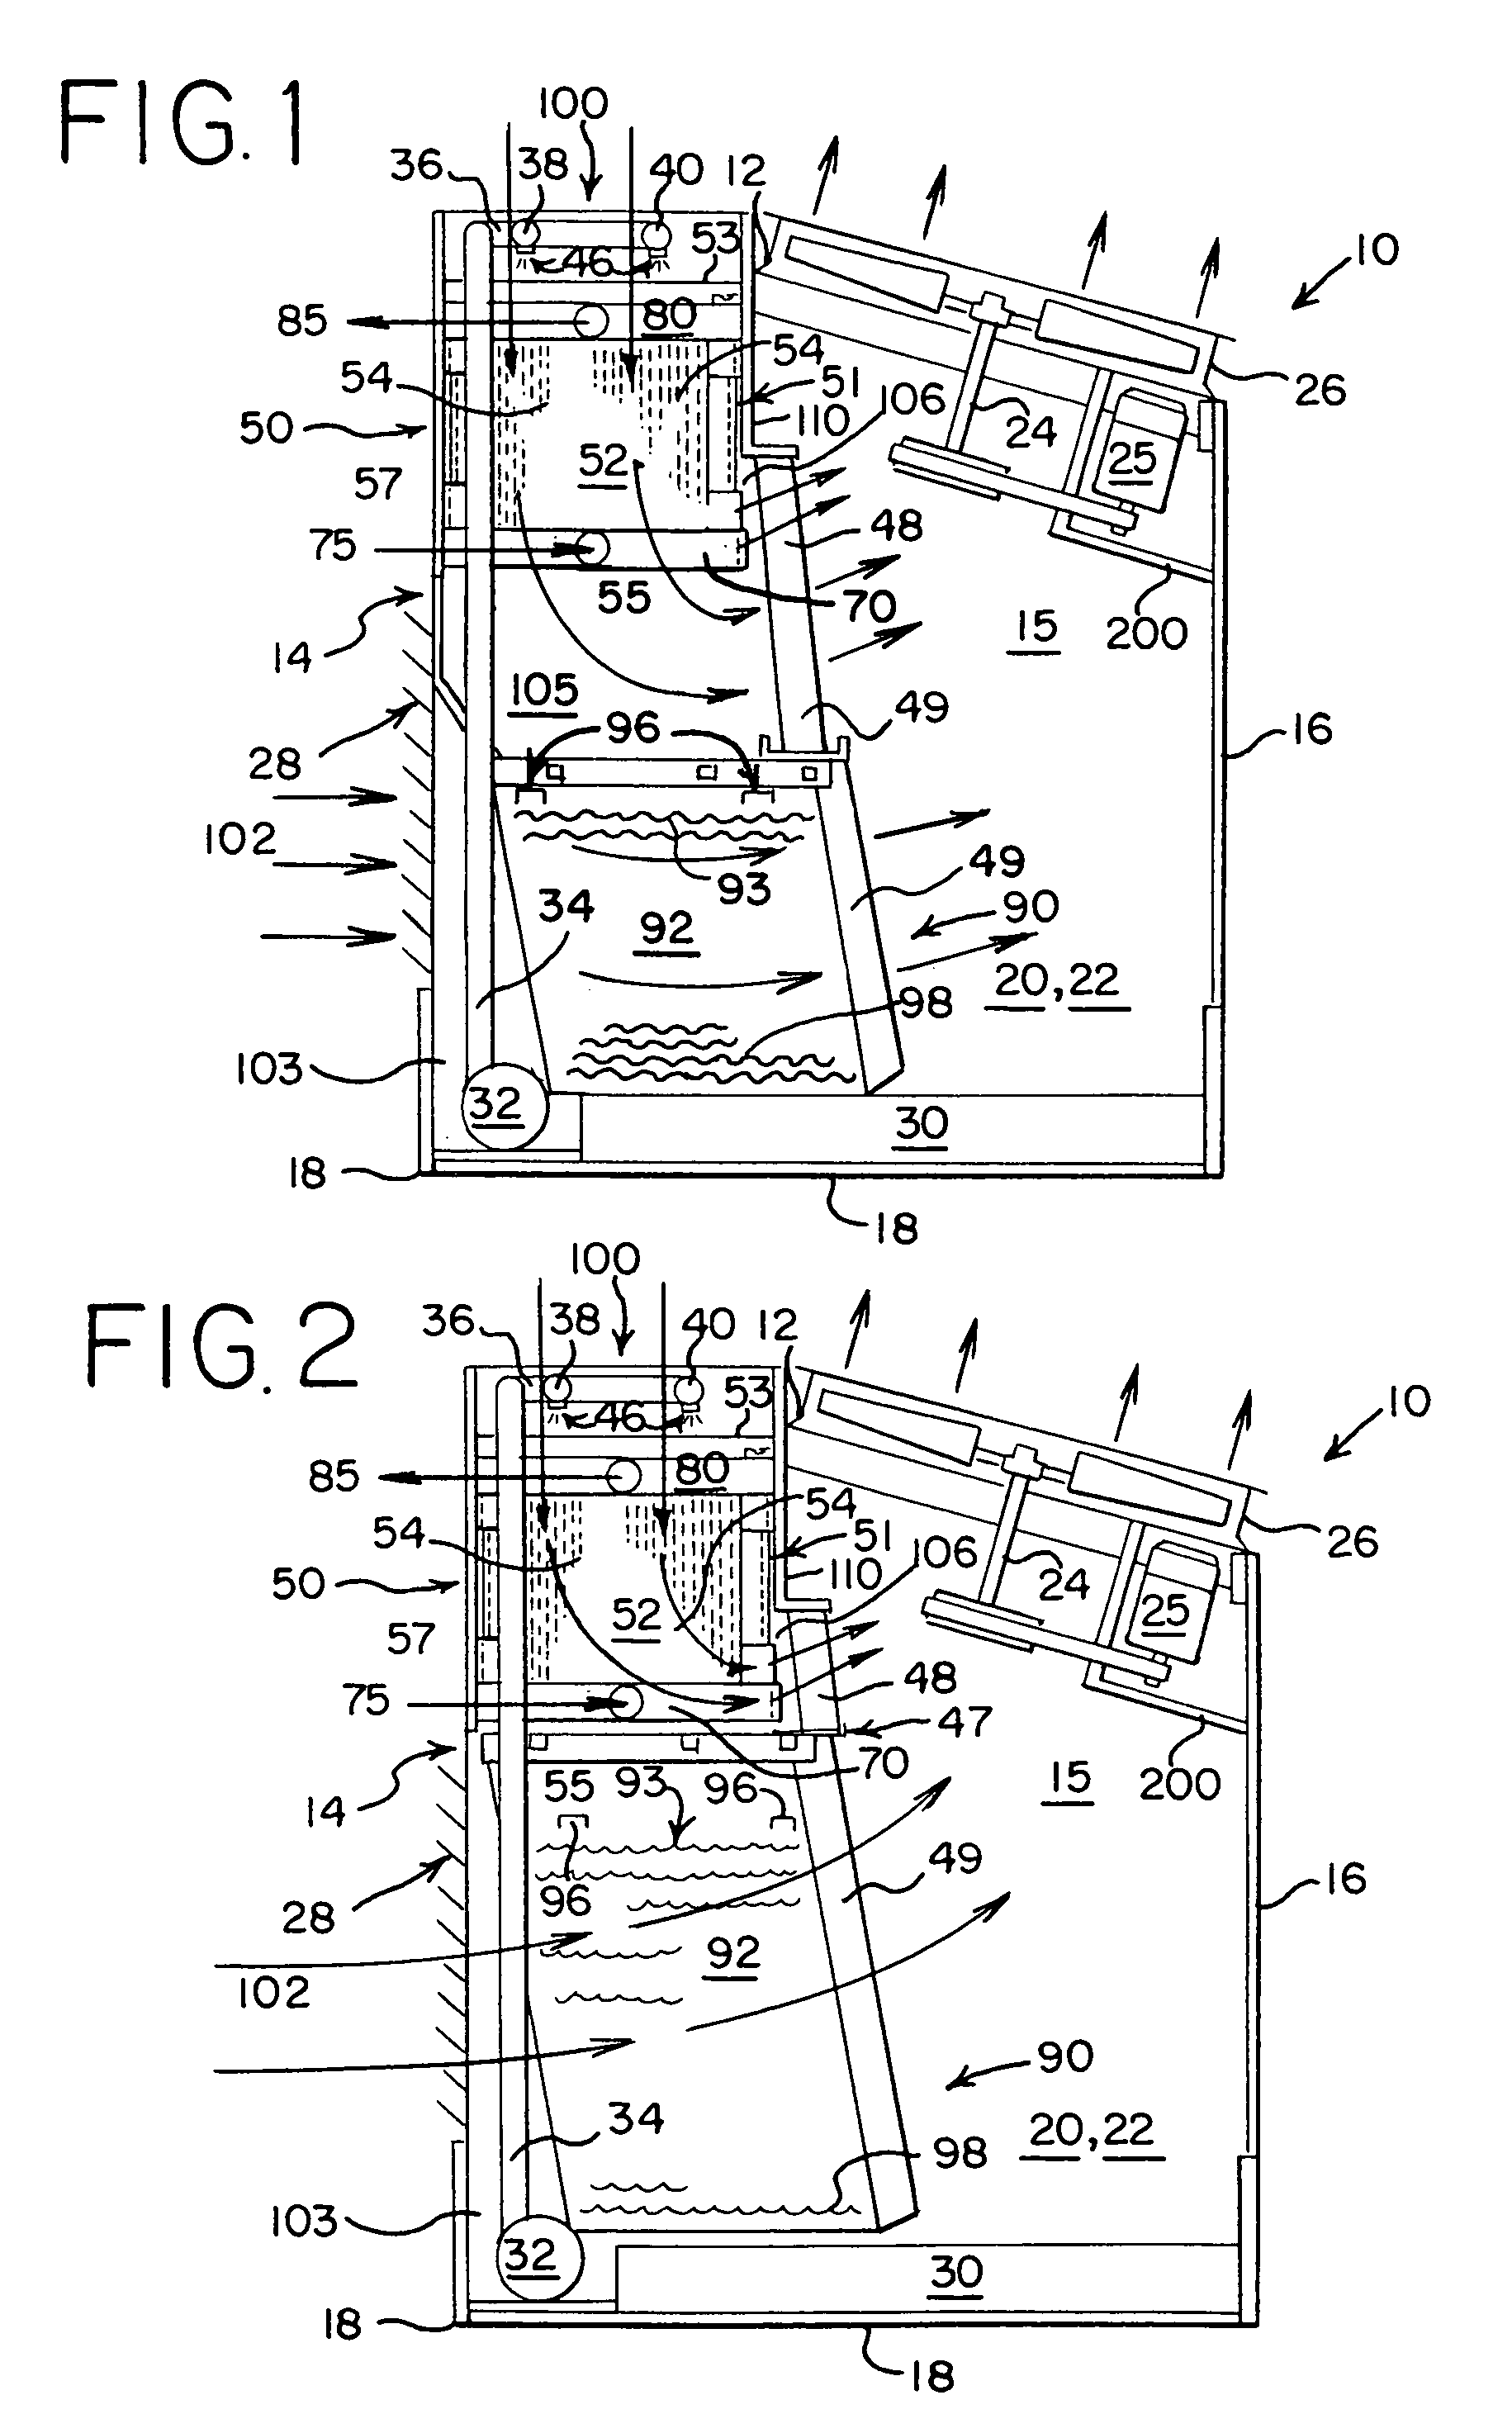 Heat transfer tube assembly with serpentine circuits